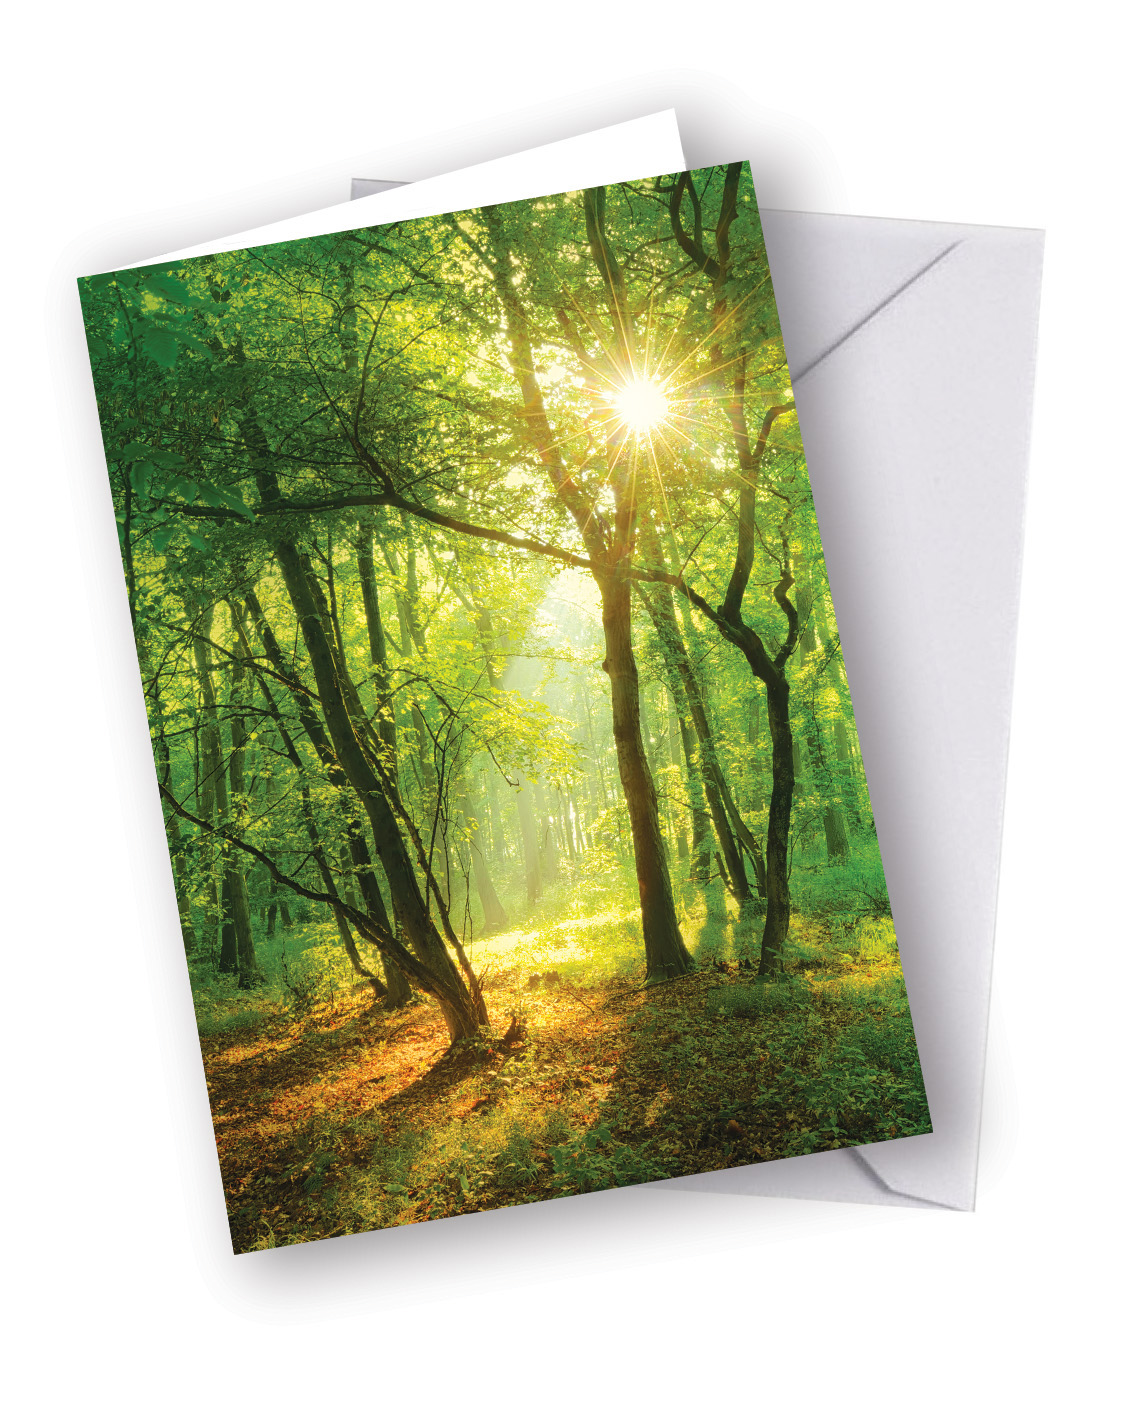 This Card Plants a Woodland Tree